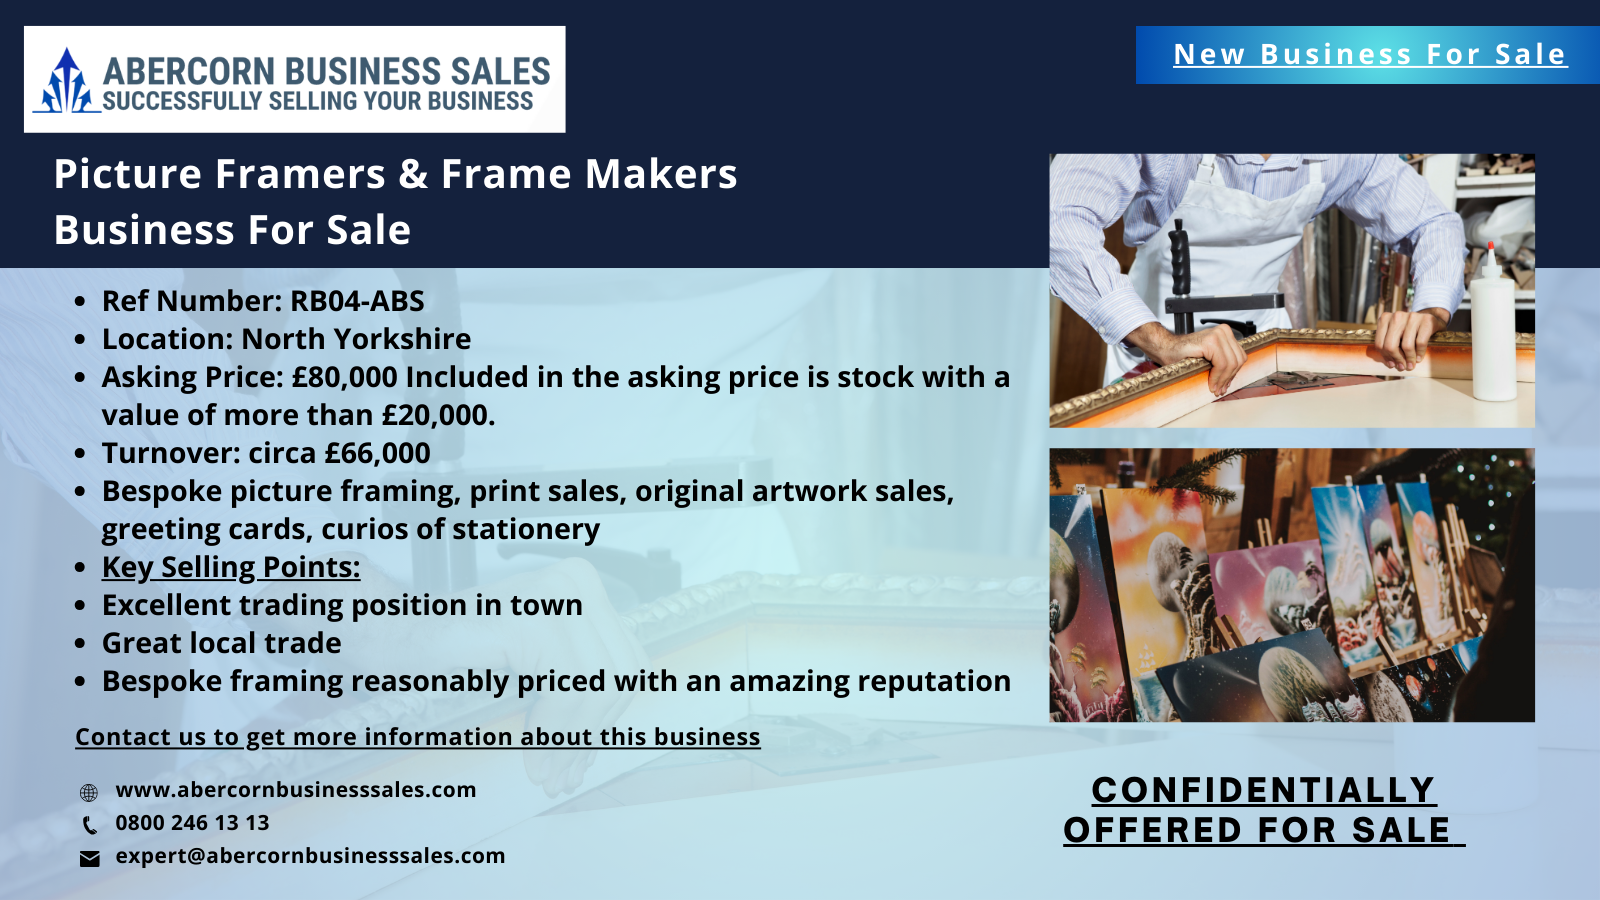 RB04-ABS - Picture Framers & Frame Makers Business for sale - Bespoke picture framing, print sales, original artwork sales, greeting cards, curios of stationery